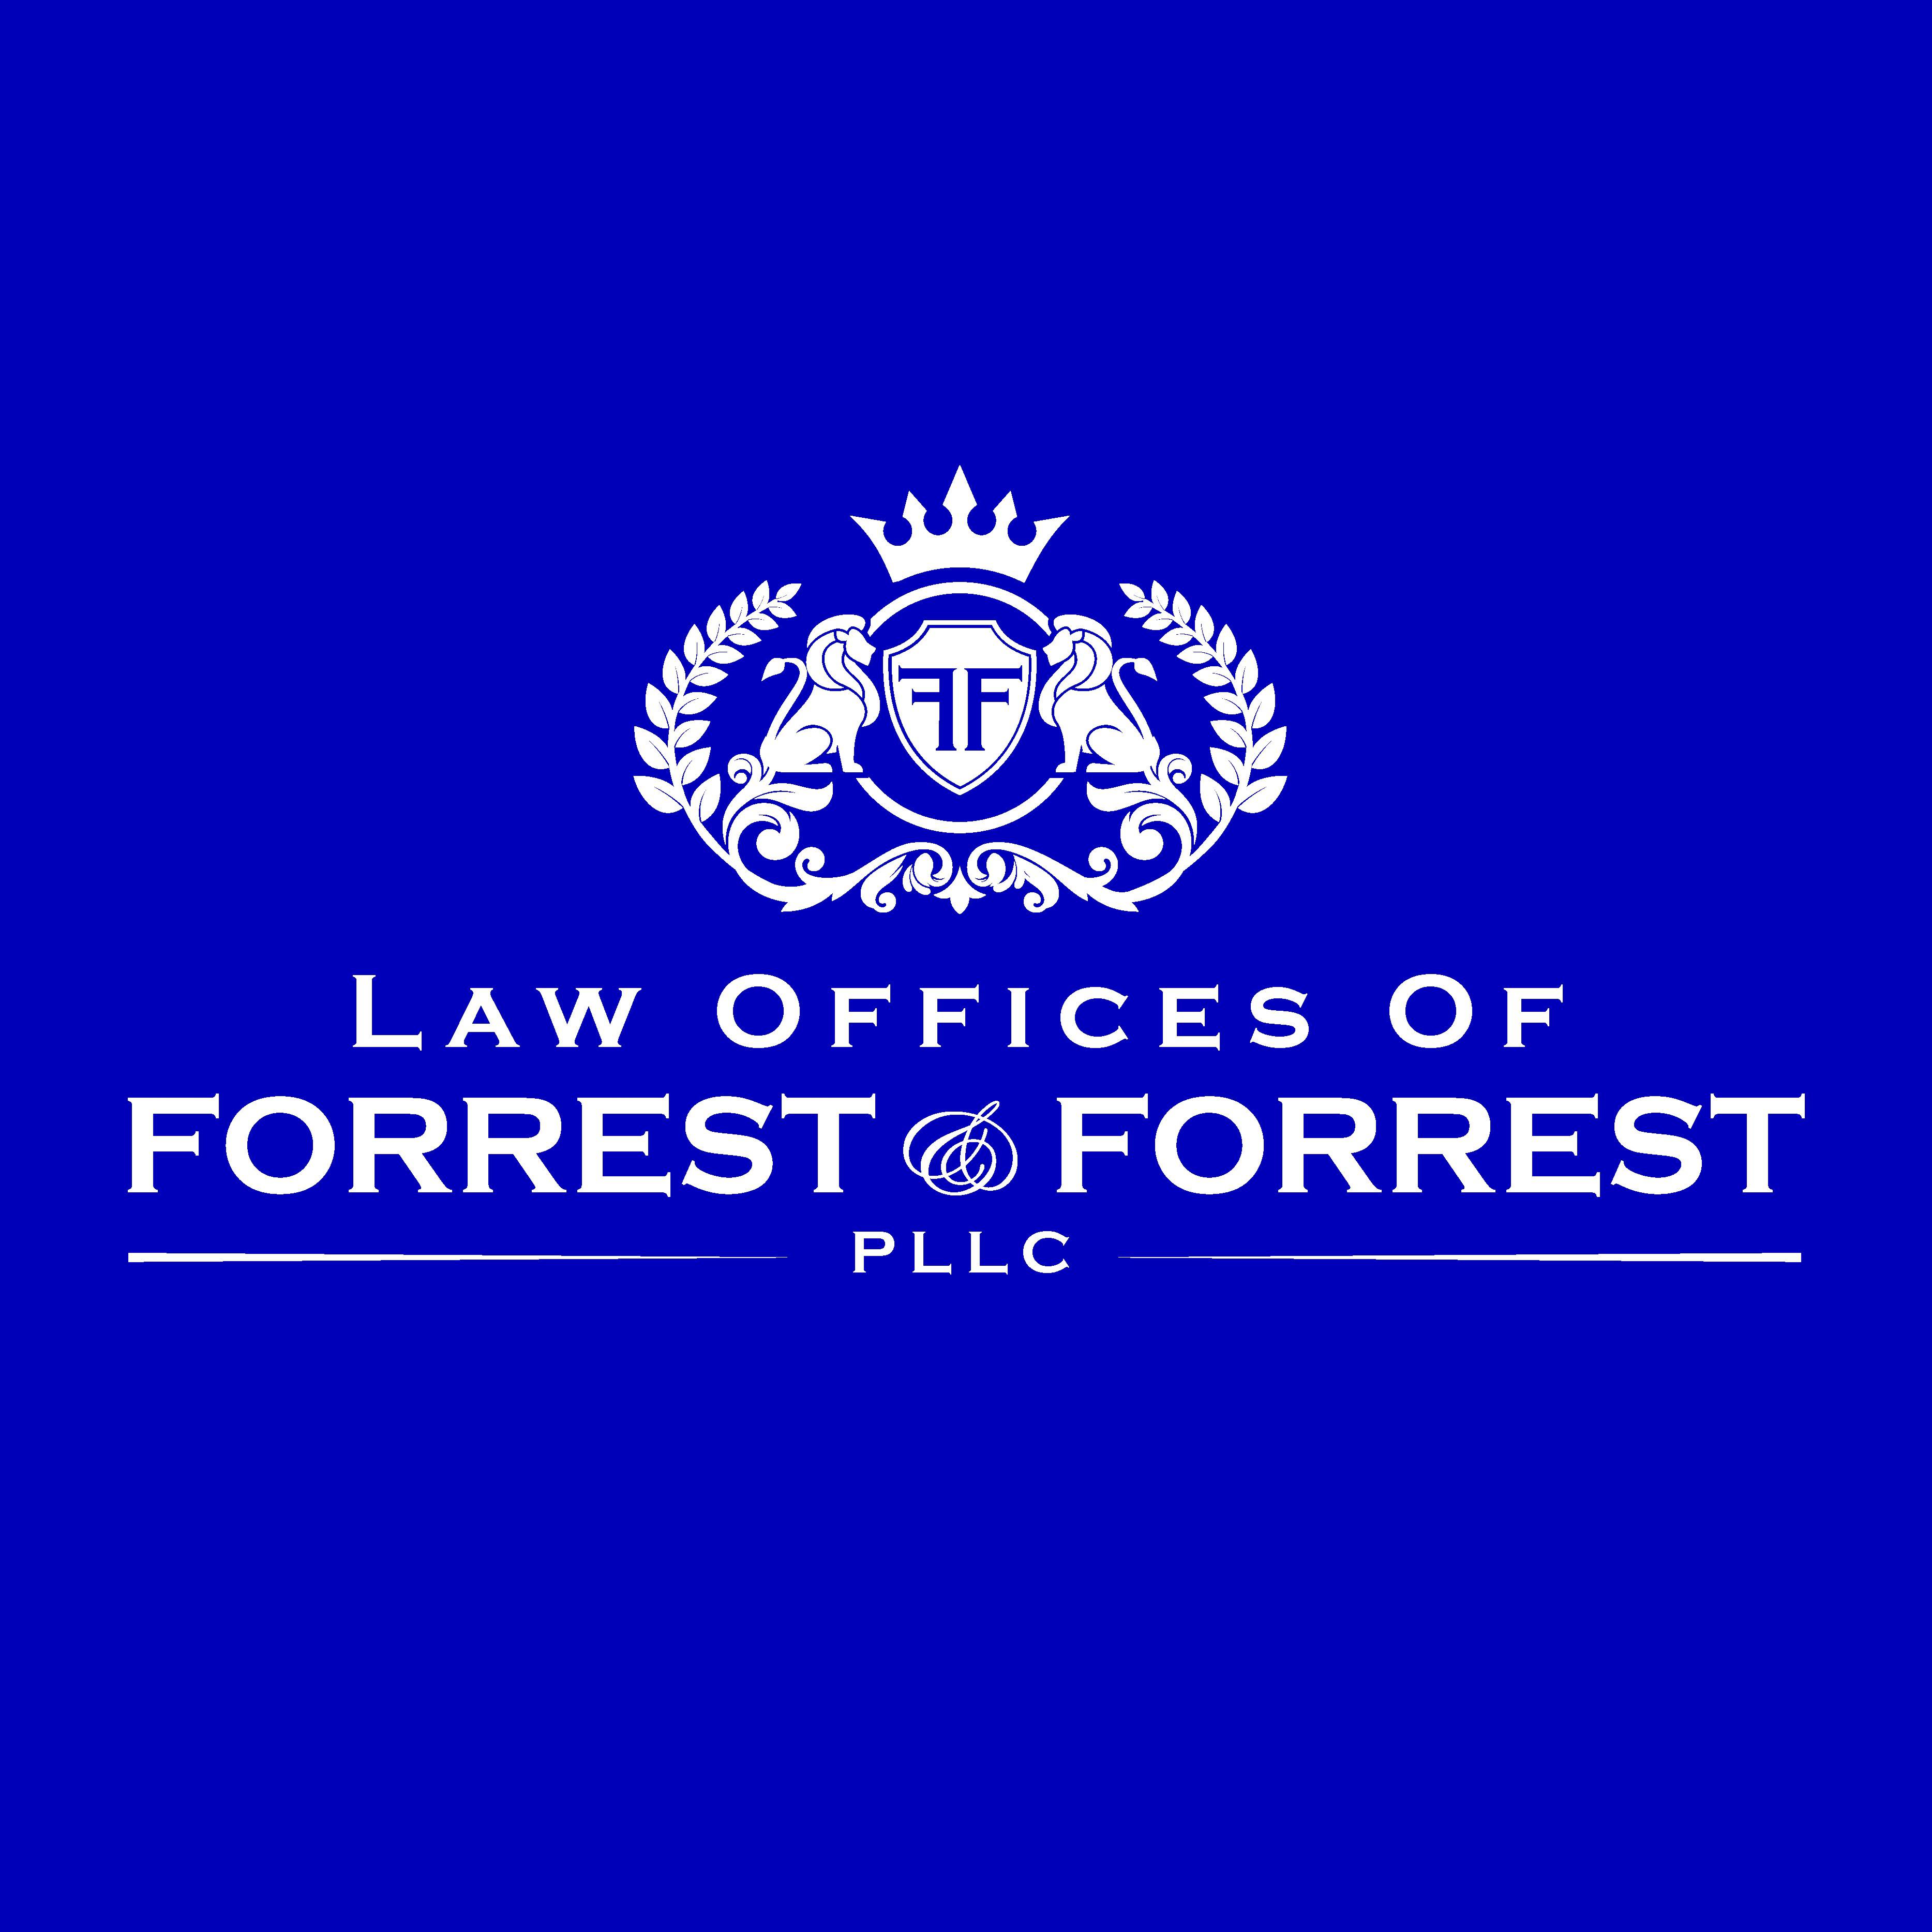 Law Offices of Forrest & Forrest, PLLC